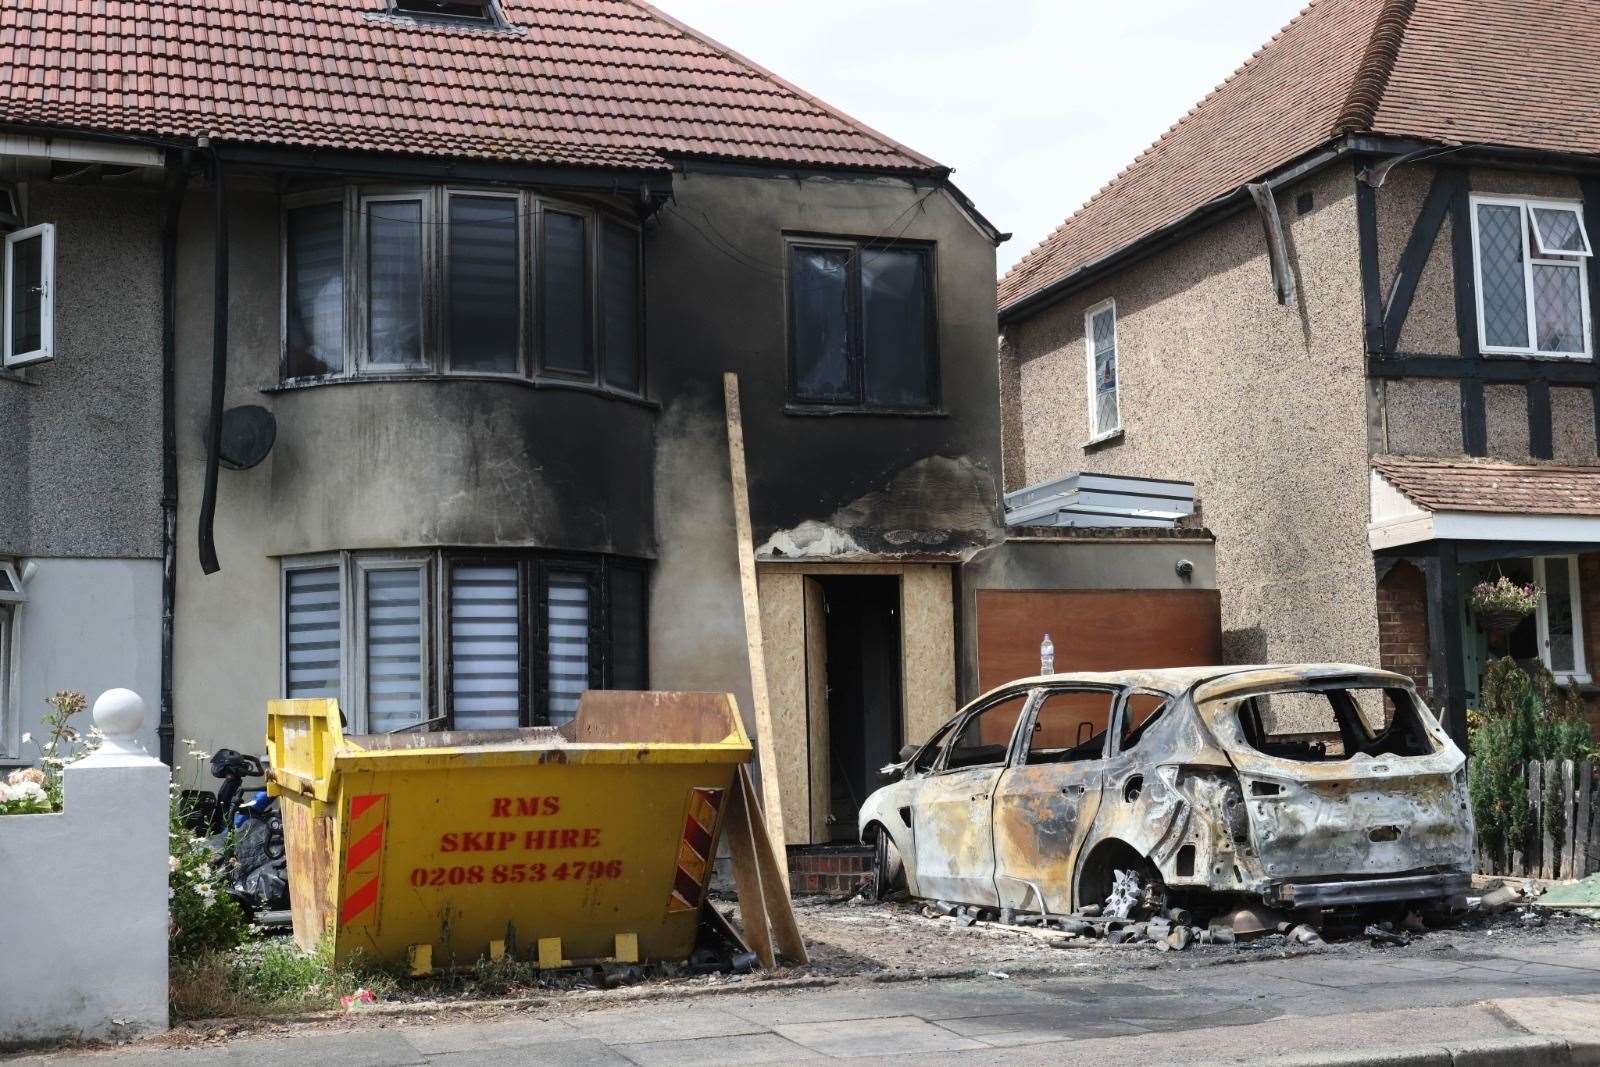 TikTok-star family The Smithy's have been targeted by arsonists Picture: UKNIP